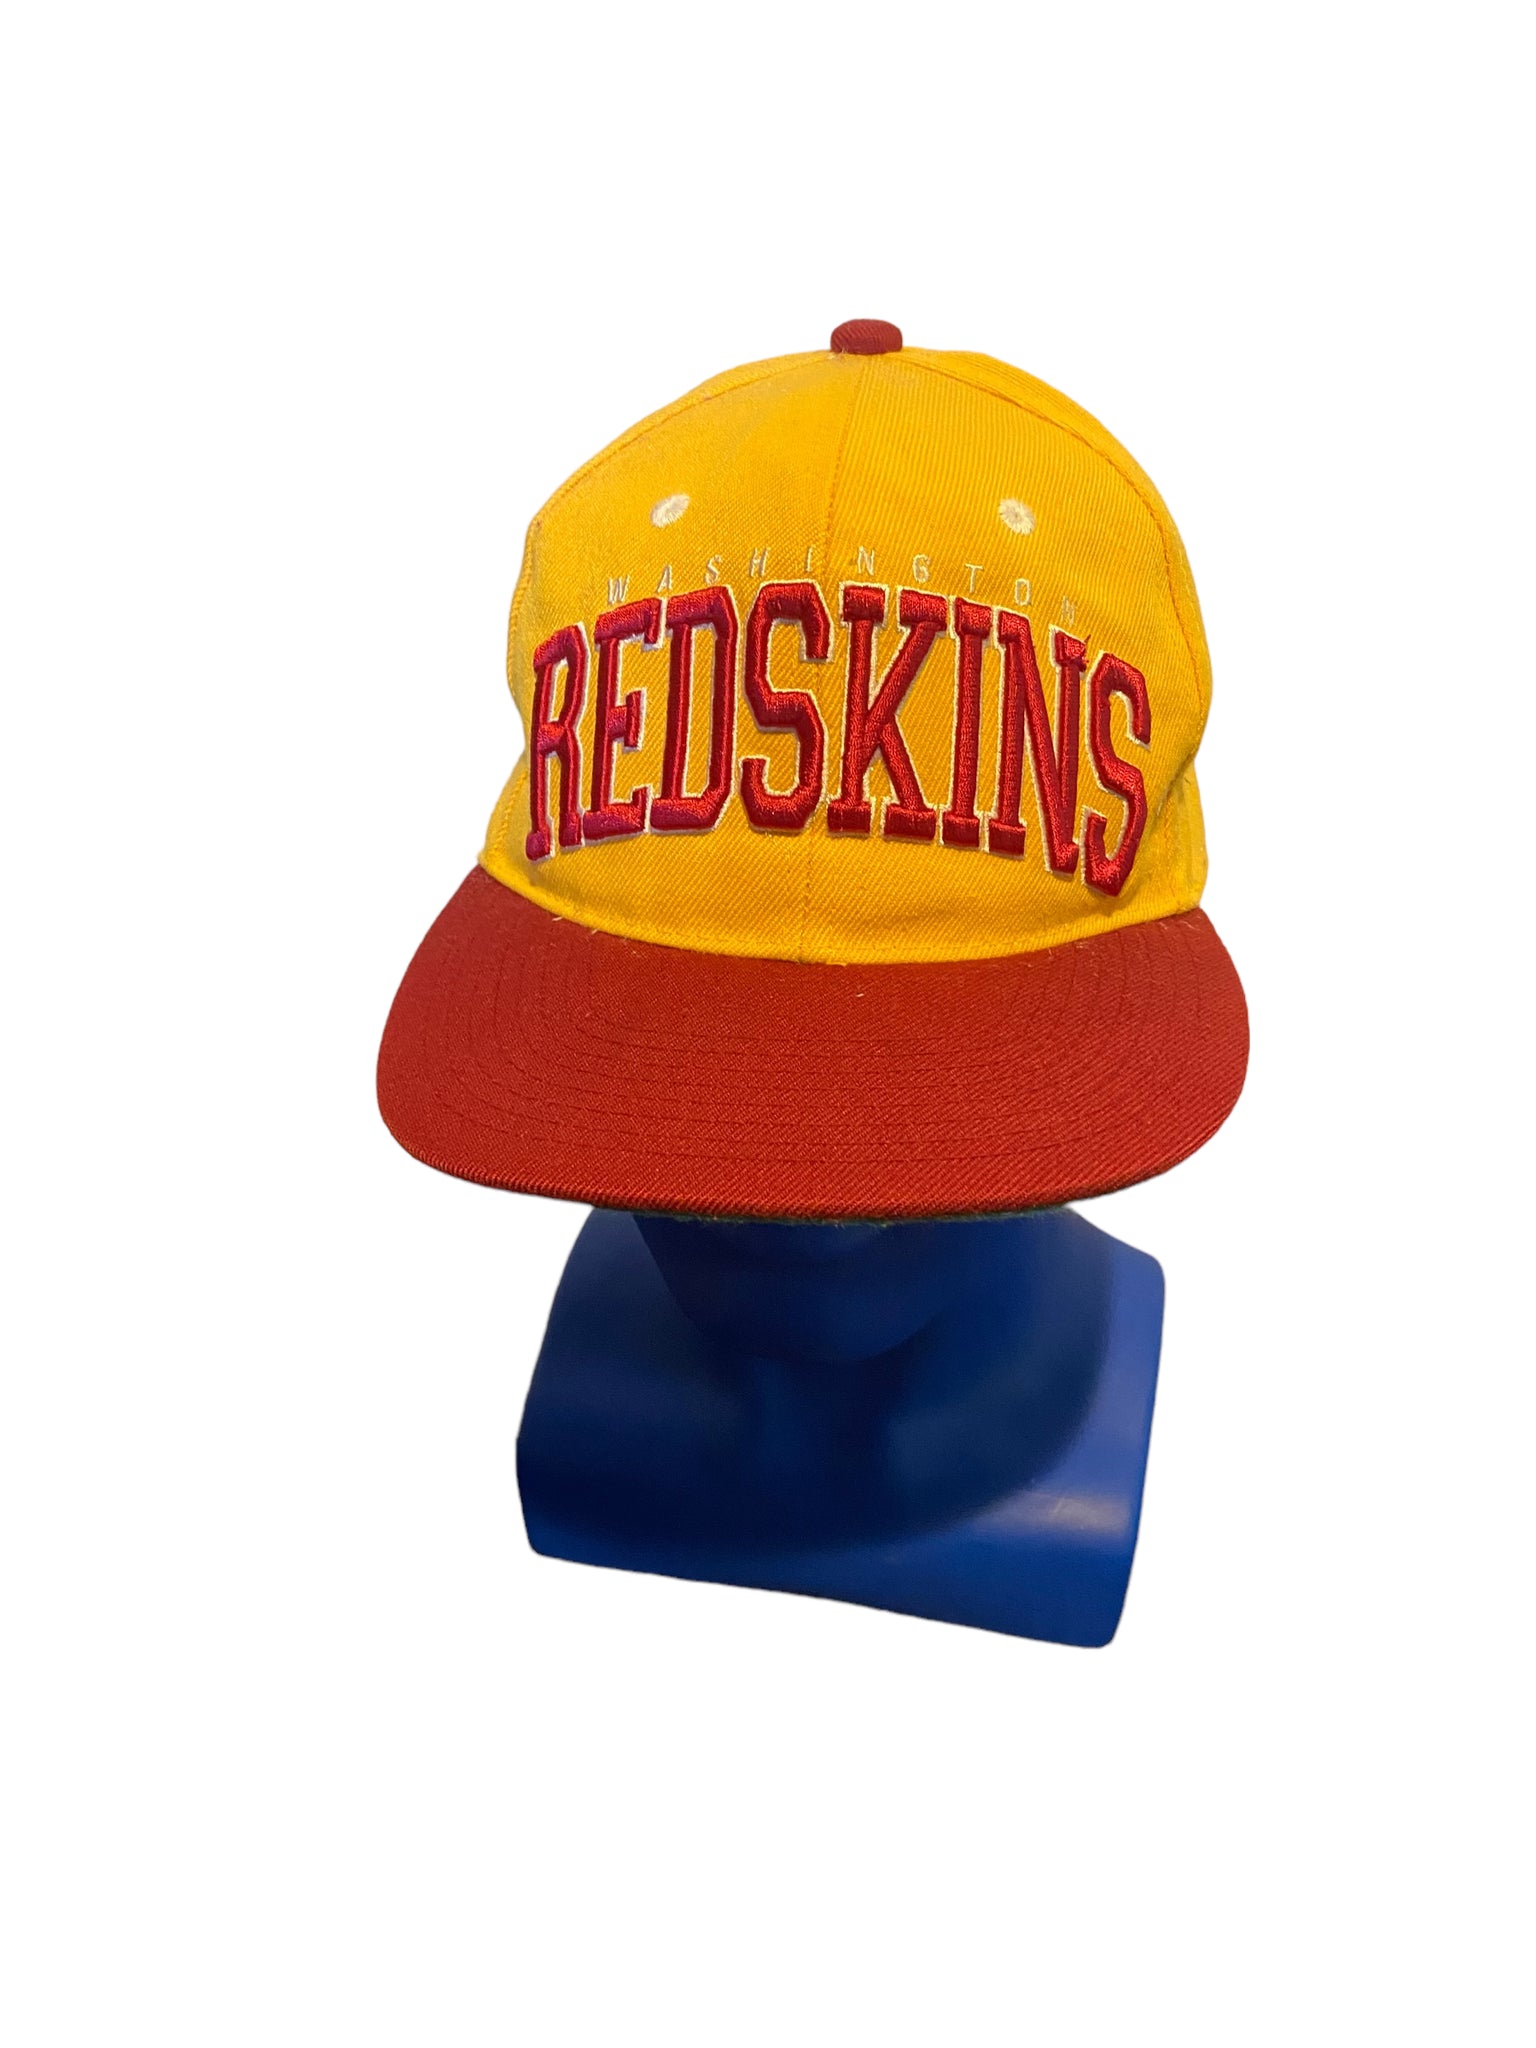 nfl team apparel redskins embroidered w logo on side red and yellow snapback hat